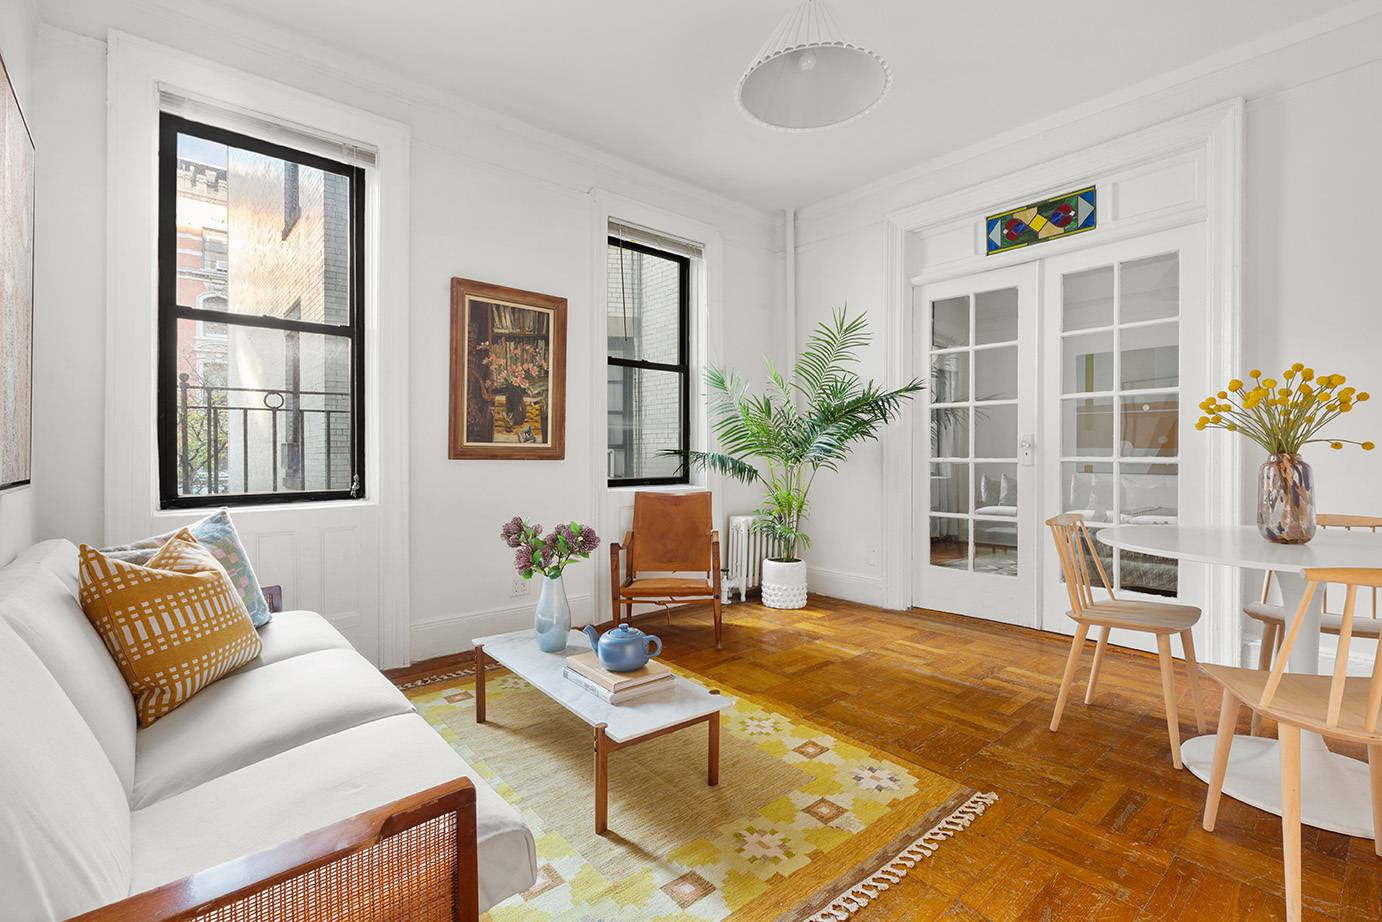 DEAL FELL THROUGH BUYER LOST THEIR JOB Bright and quiet 2 bedroom located on one of the nicest tree lined blocks in Morningside Heights.